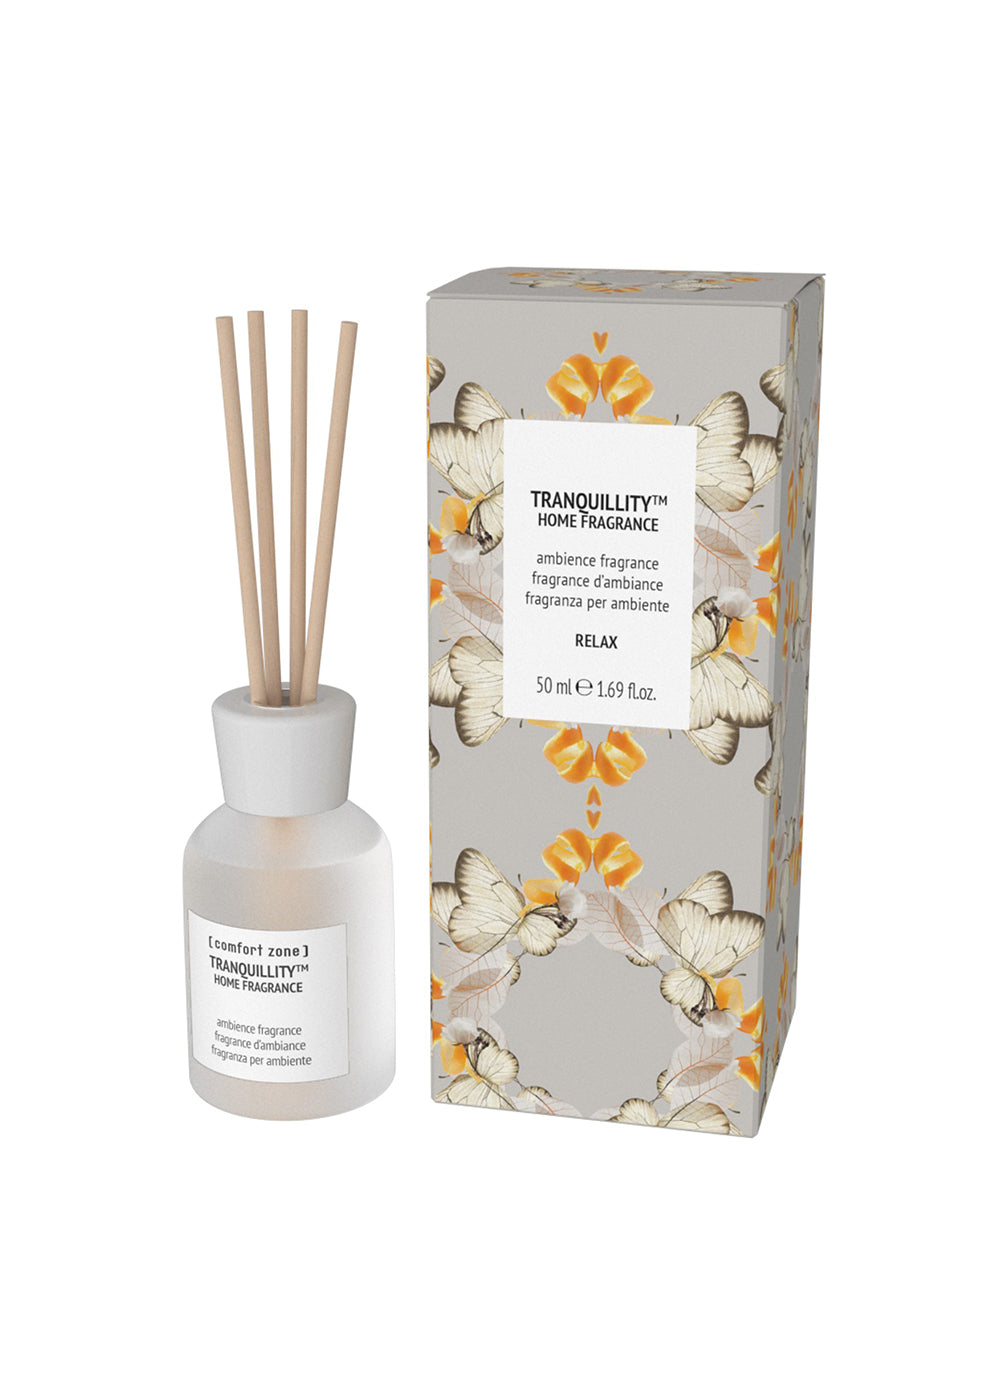 [comfort zone] Tranquillity™ Home Fragrance